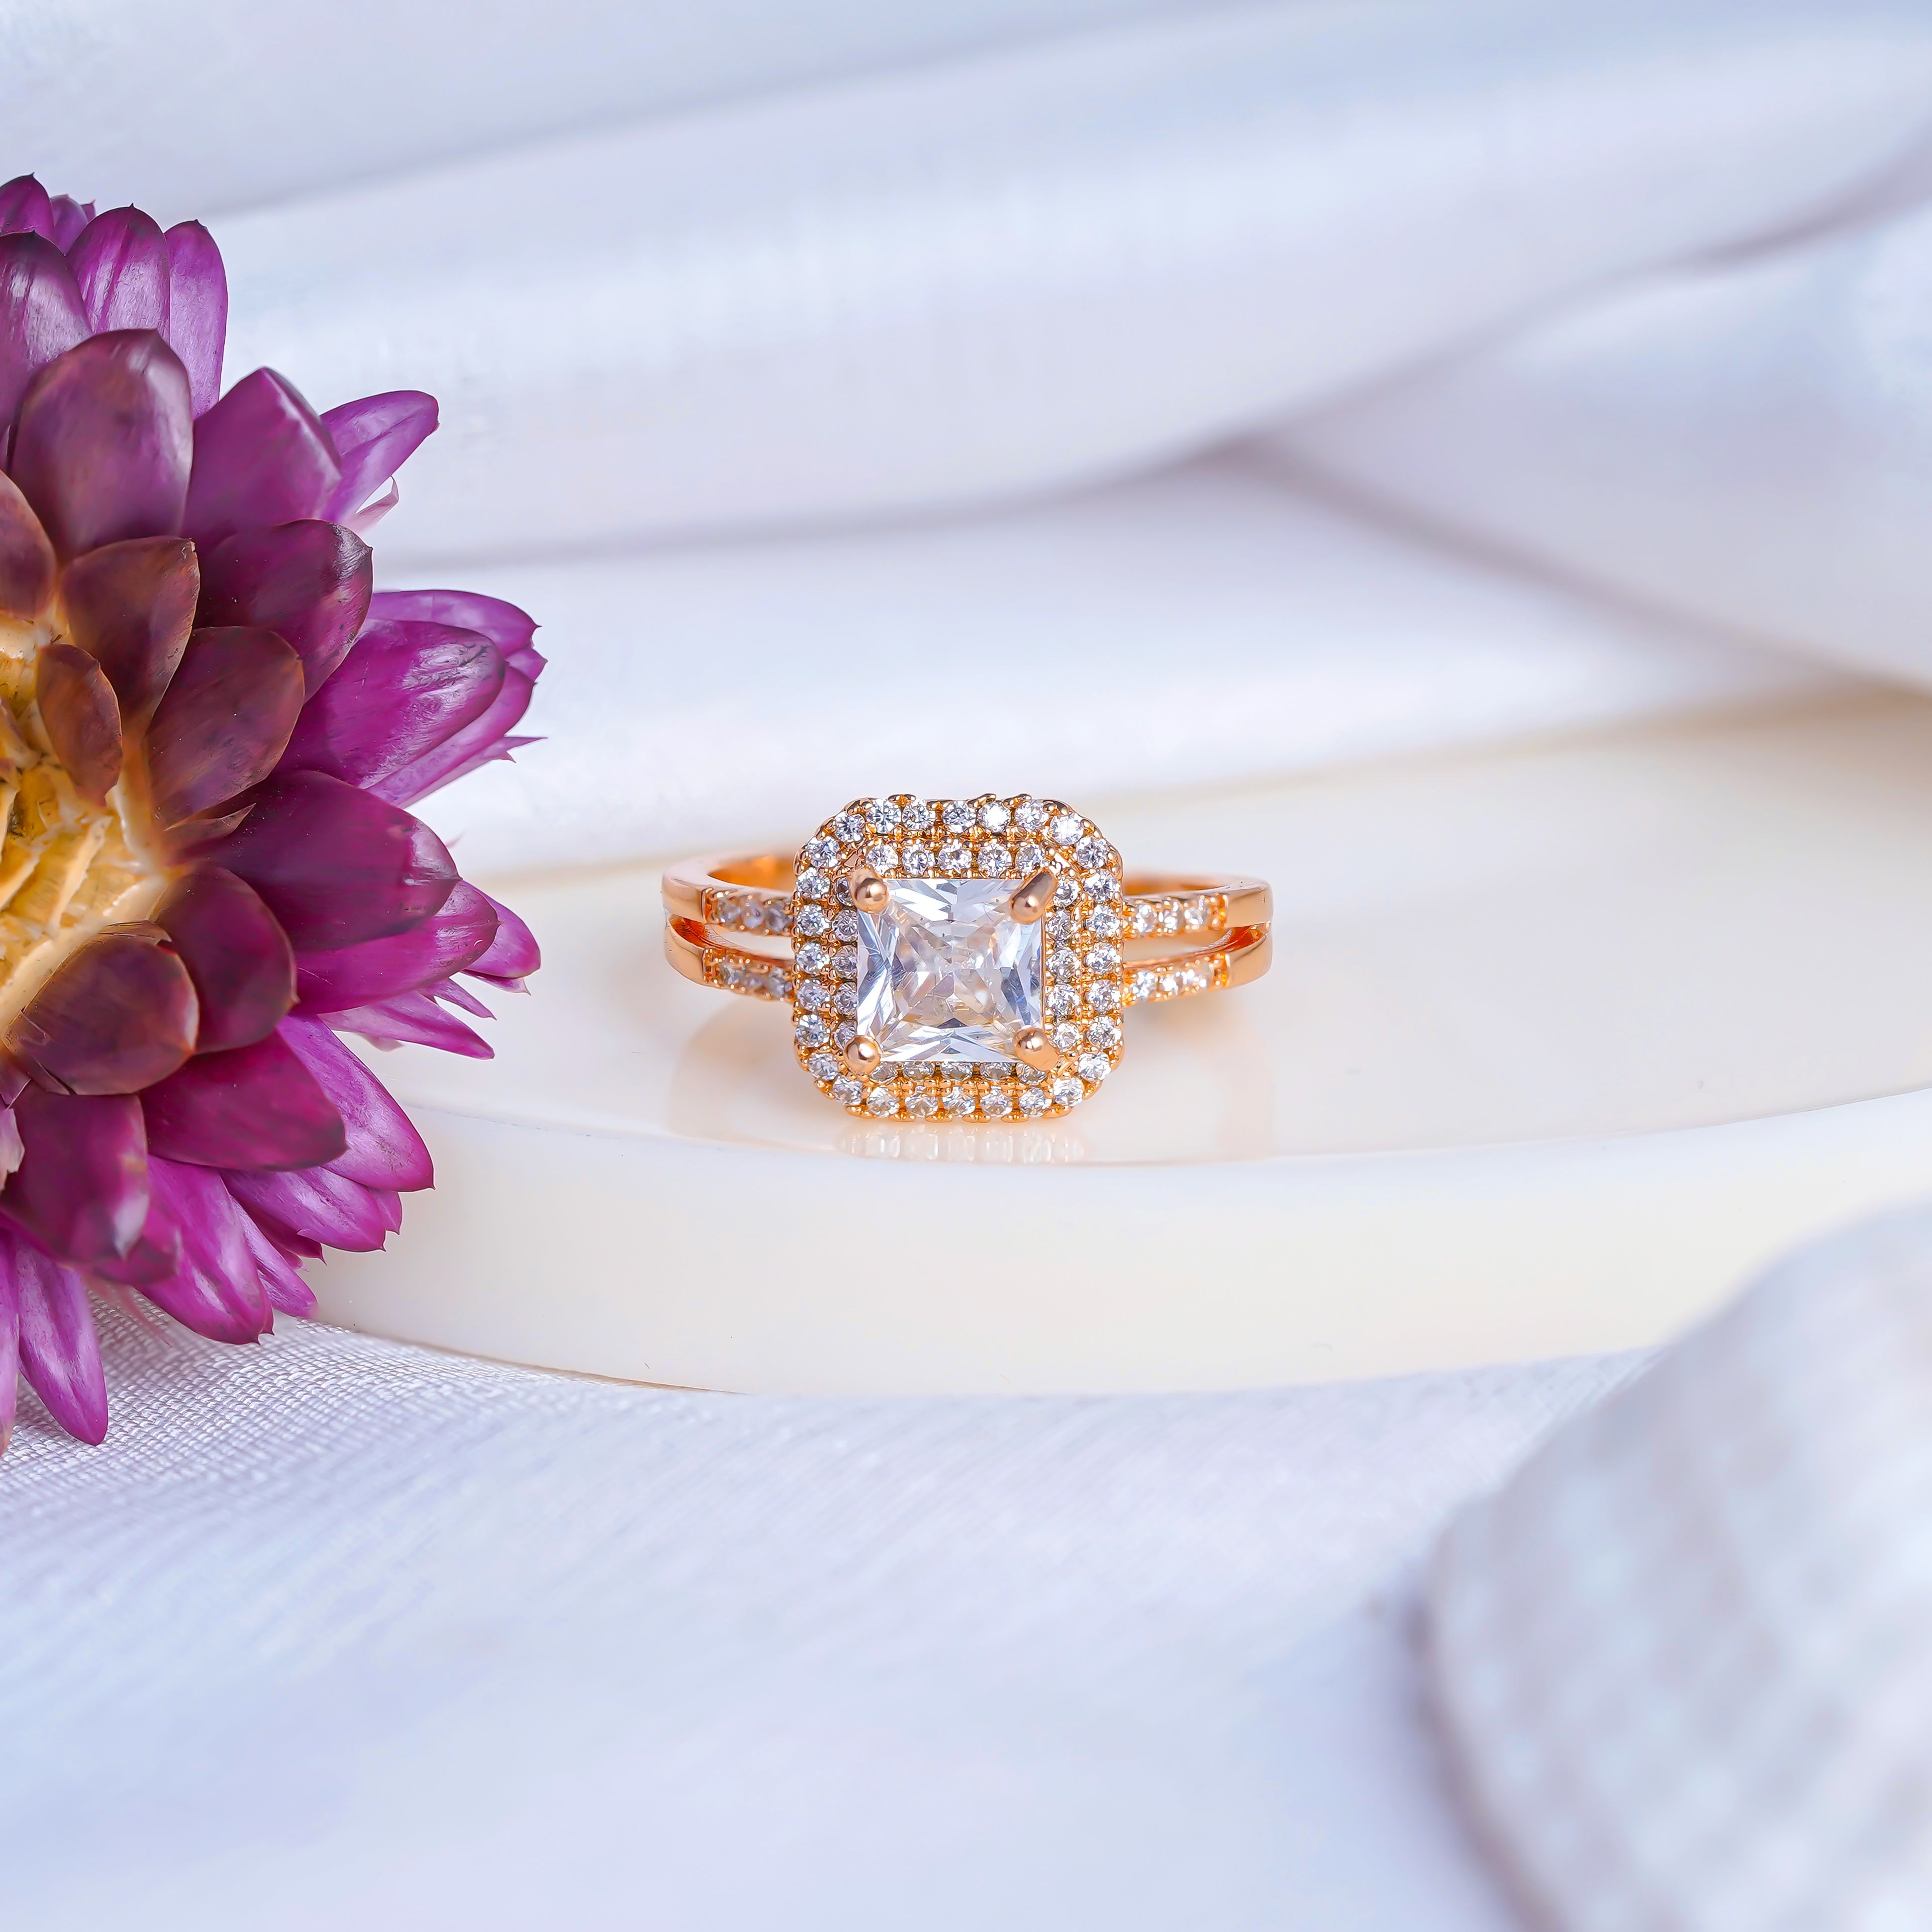 "Jewelsium Radiance: Illuminate Your Look with Exquisite Rings"